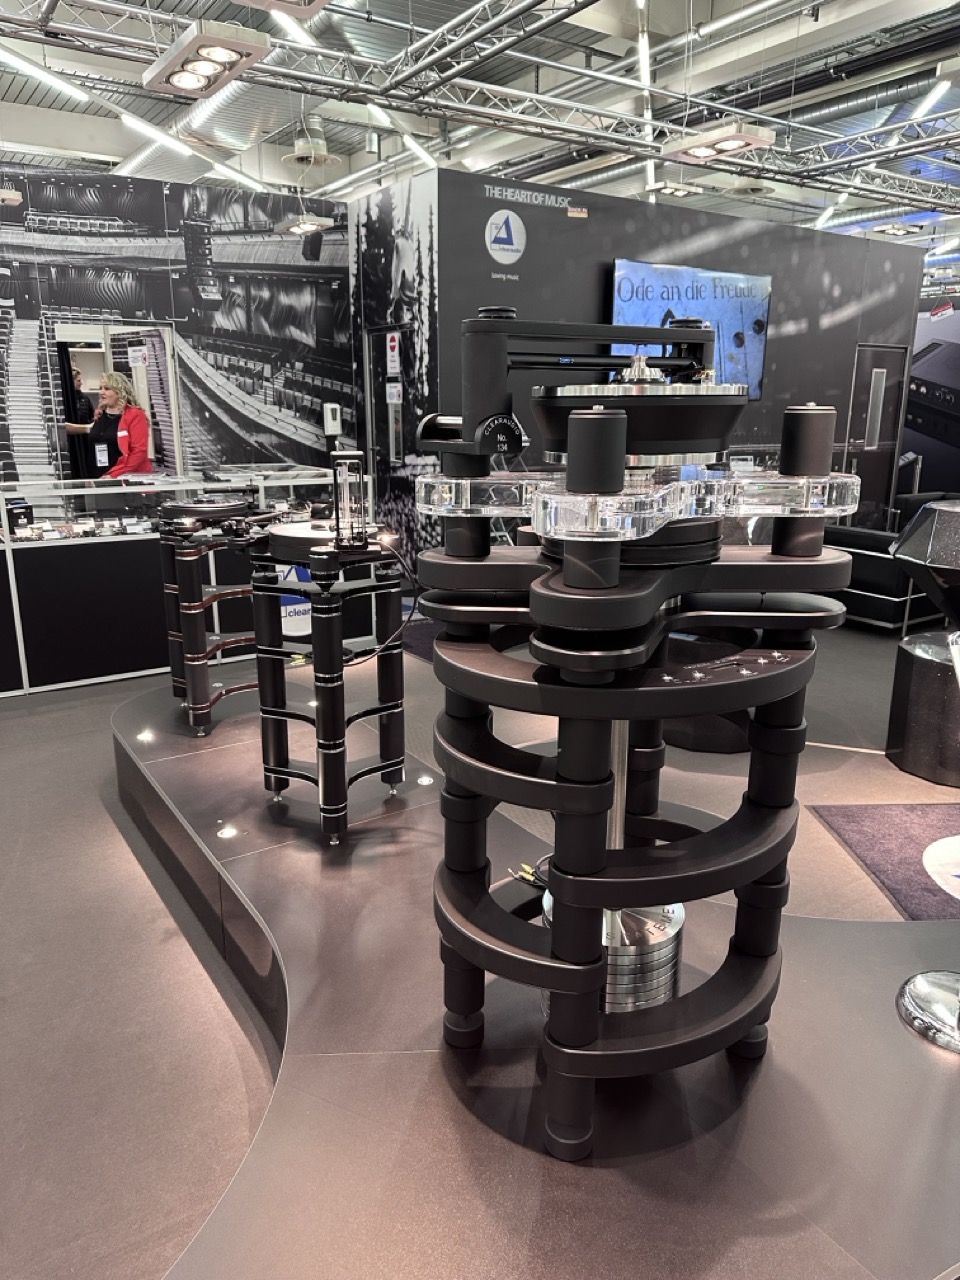 This year I noticed a lot of fine examples of incredibly engineered turntables, such as Clear Audio`s Statement, weighing in at 350kg...